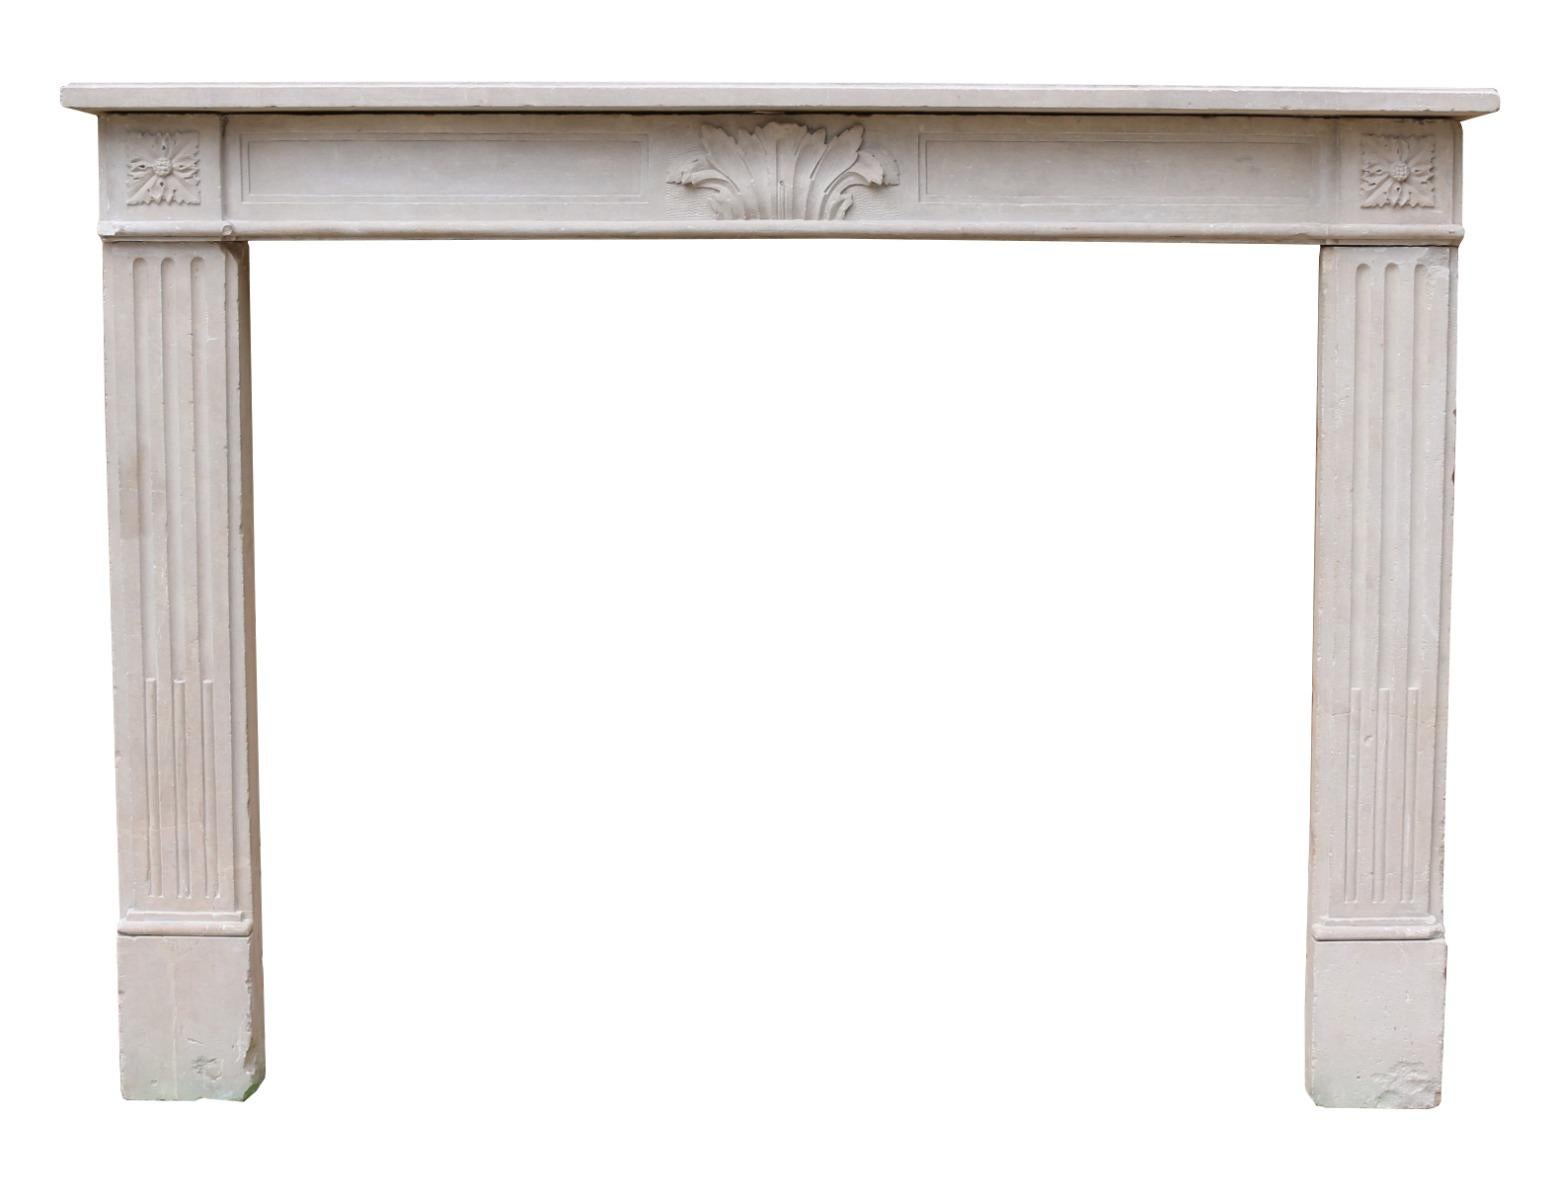 With rectangular shelf, above a panelled frieze with acanthus centre. Fluted jambs with patarea end blocks.

Additional Dimensions

Opening Height 104.5 cm

Opening Width 128 cm

Width Between Foot blocks 161 cm.